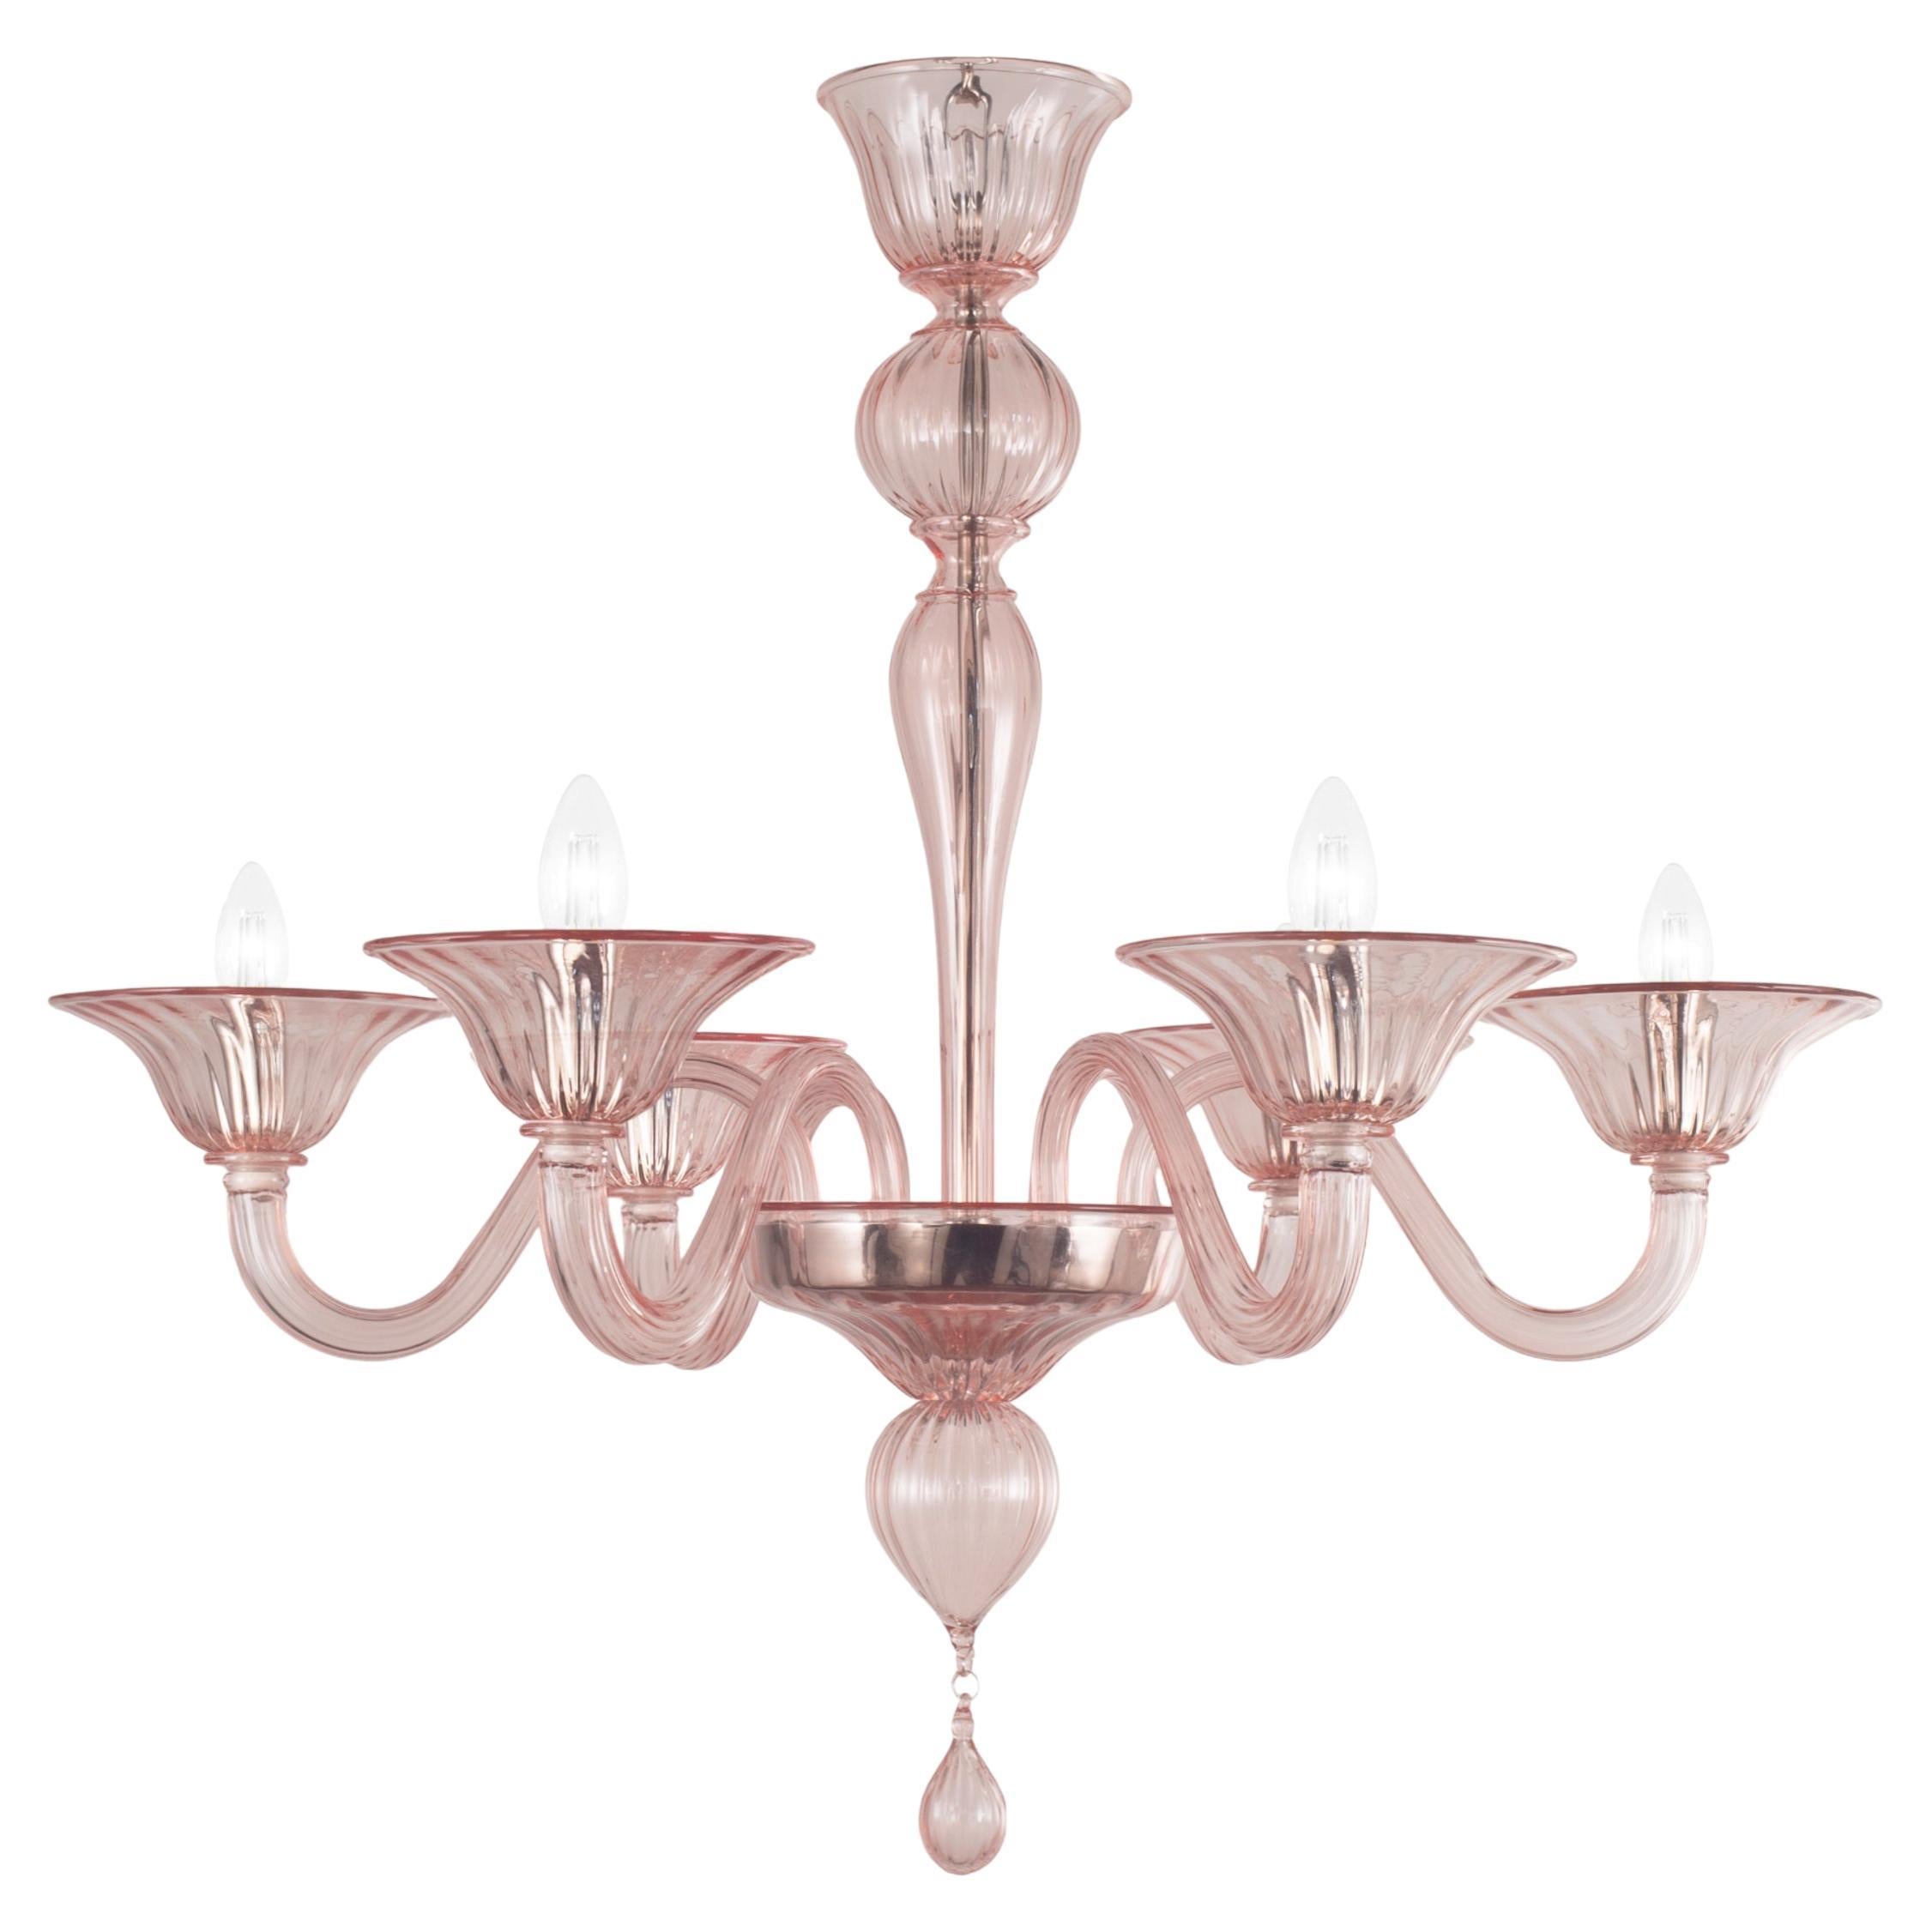 Simplicissimus Murano Chandelier 6 arms Powder Pink Glass by Multiforme in Stock